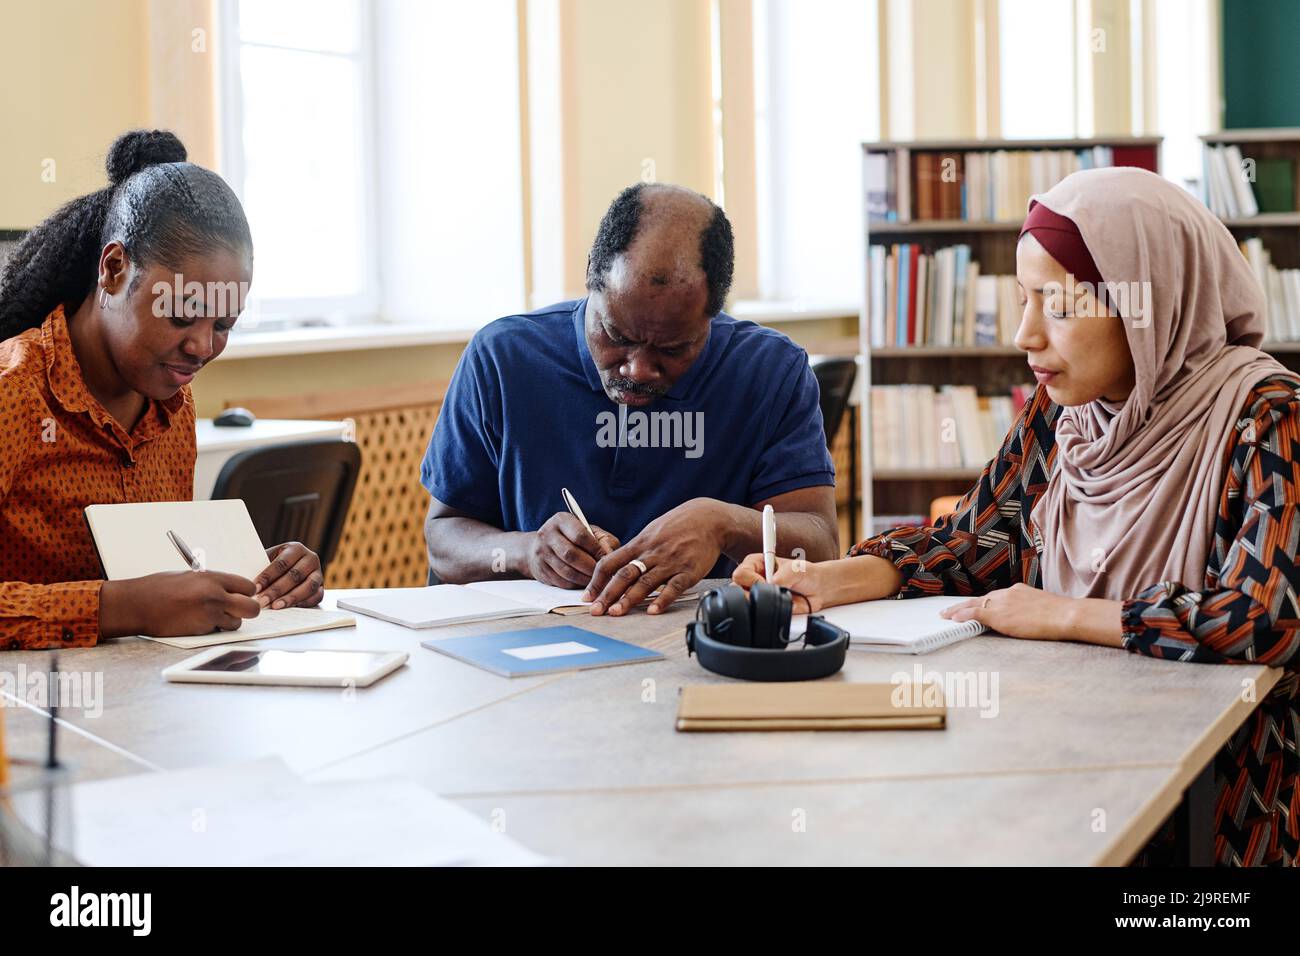 Group of three multi-ethnic immigrant students sitting at table in library doing writing task during lesson Stock Photo